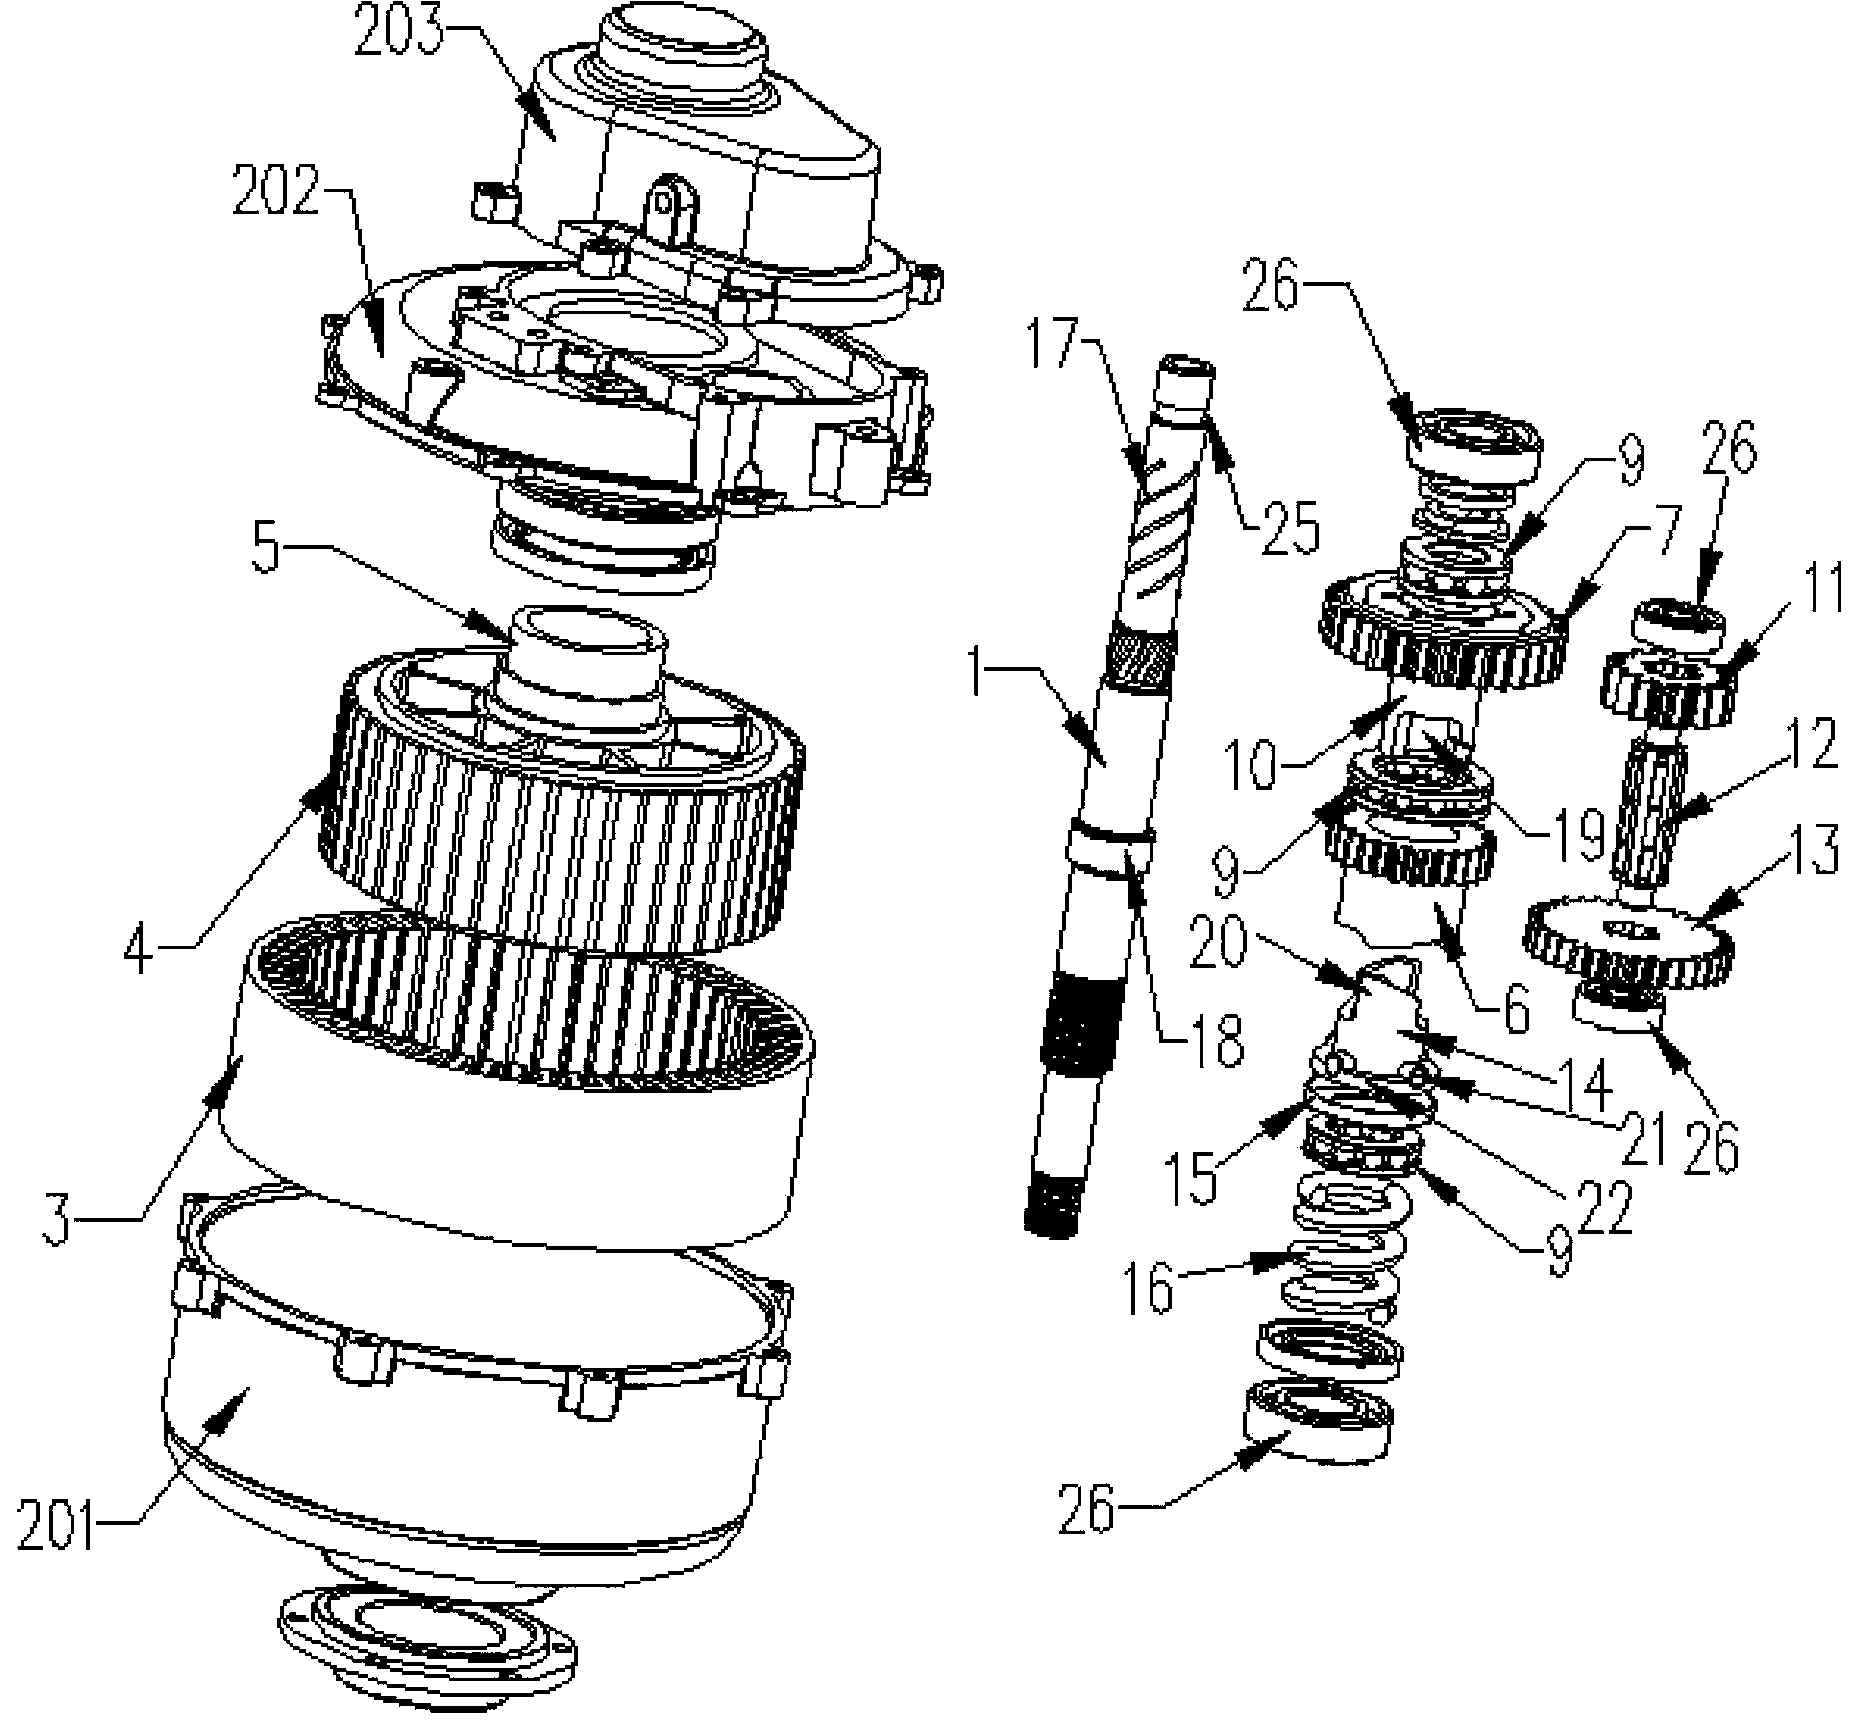 Driving motor for electric car